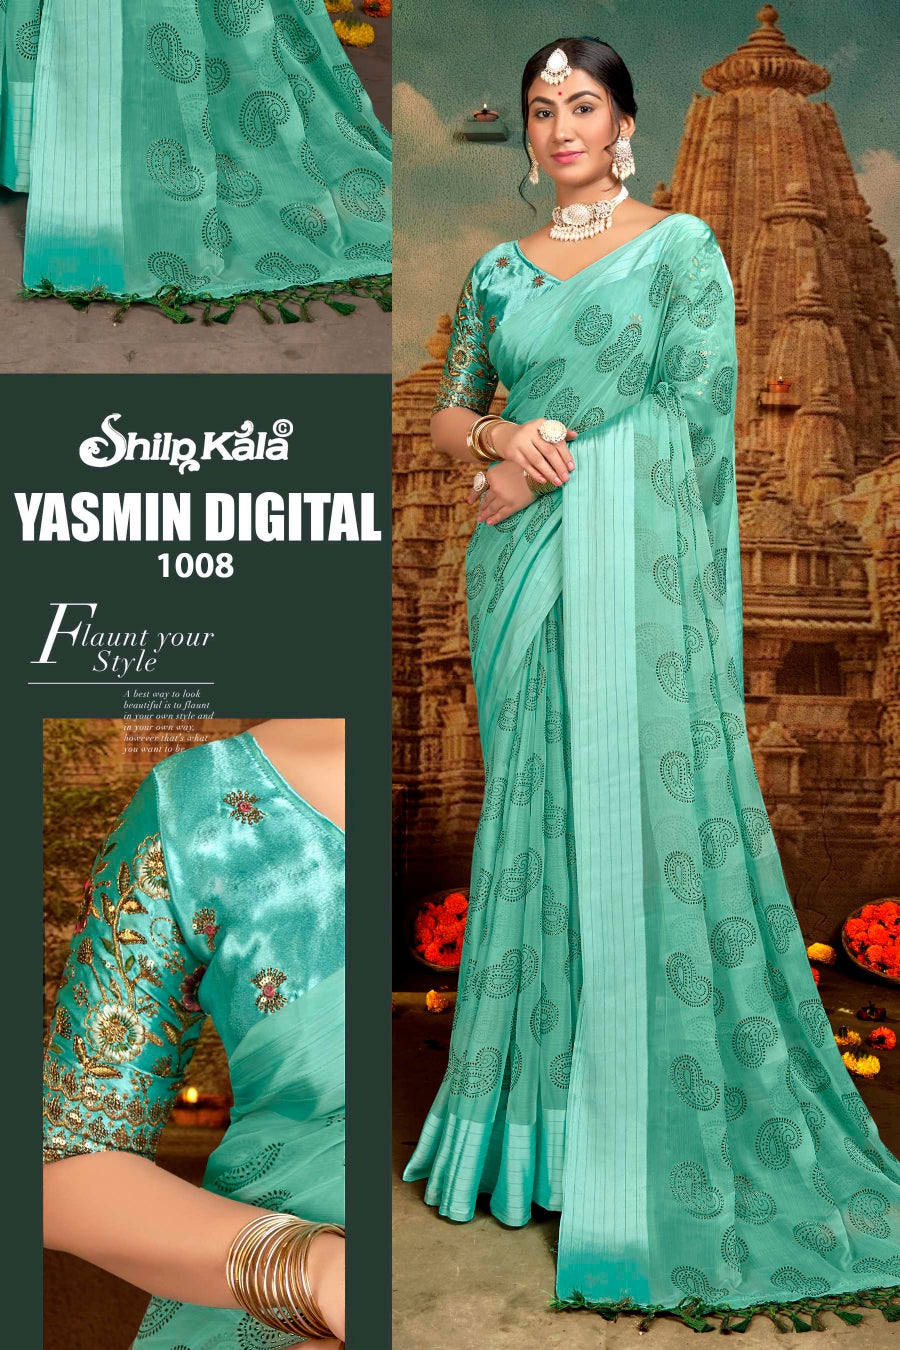 Yasmin Multicolor Saree with Fancy Work Blouse and Tone to Tone Matching